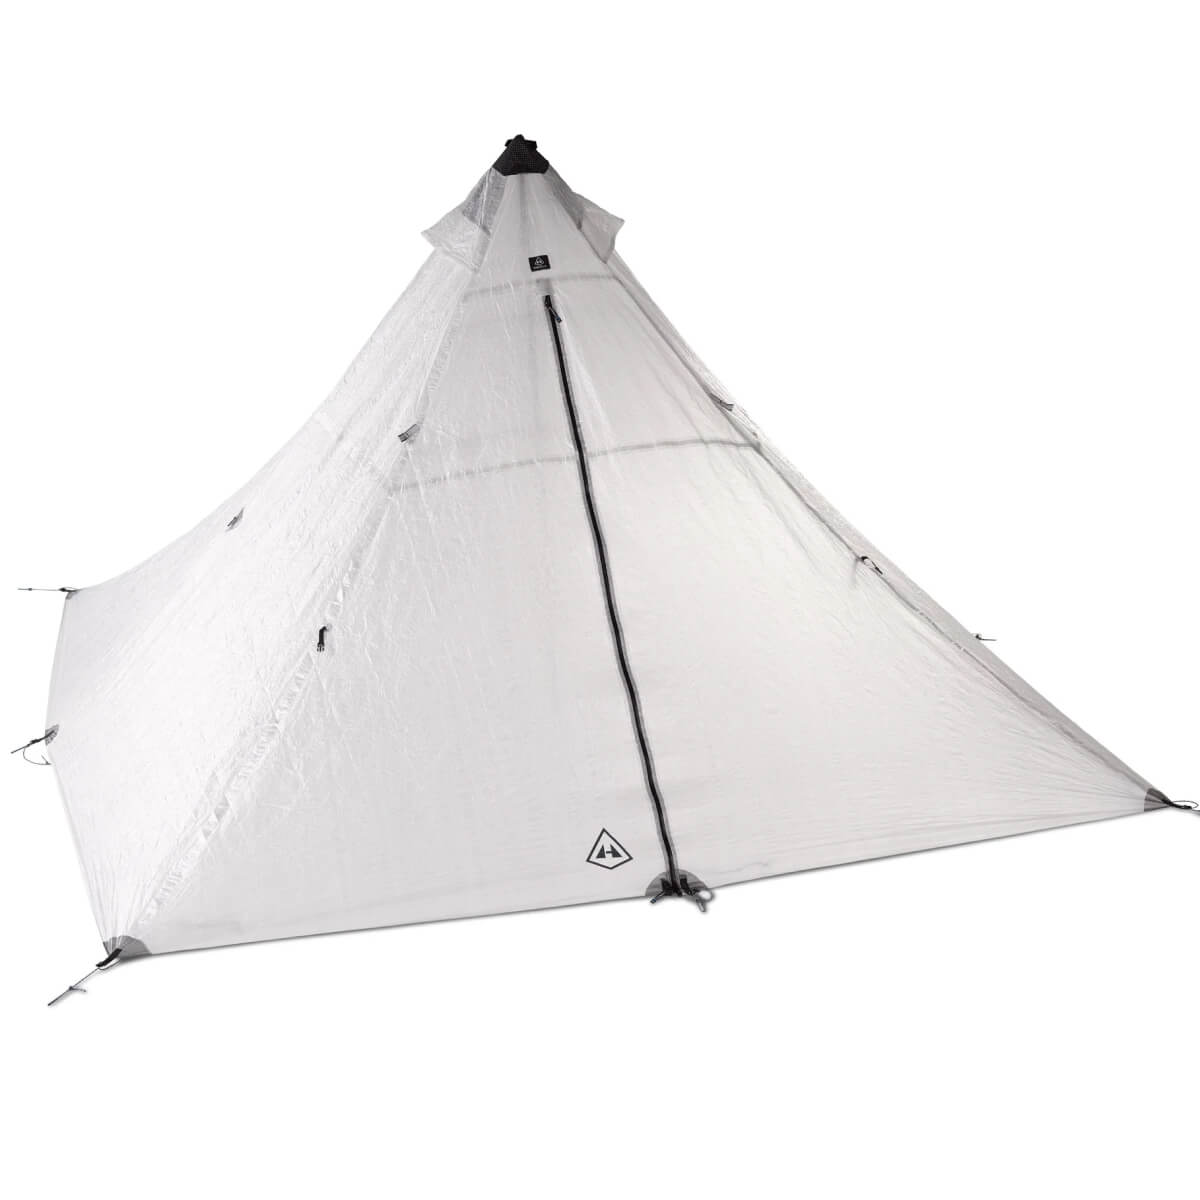 Hyperlite Mountain Gear Ultamid 4 person backpacking tent